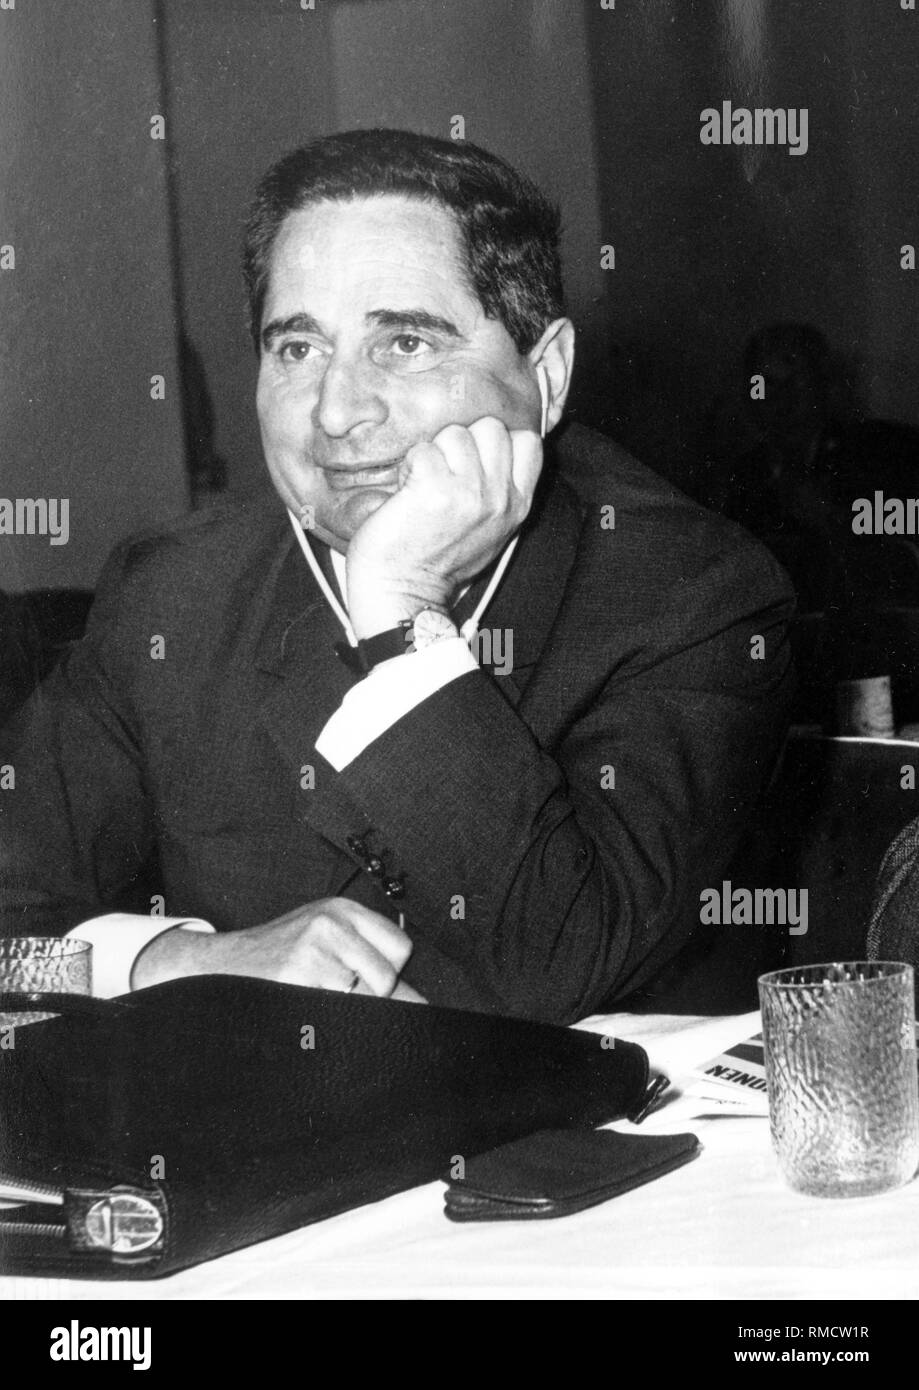 Heinz Adameck - * 21.12.1921, between 1954 - 1989 successor of Gerhard Probst, Director of the Fernsehen der DDR, Chairman of the State Committee for Television at the Council of Ministers of the GDR. Photo taken on October 2, 1970. Stock Photo